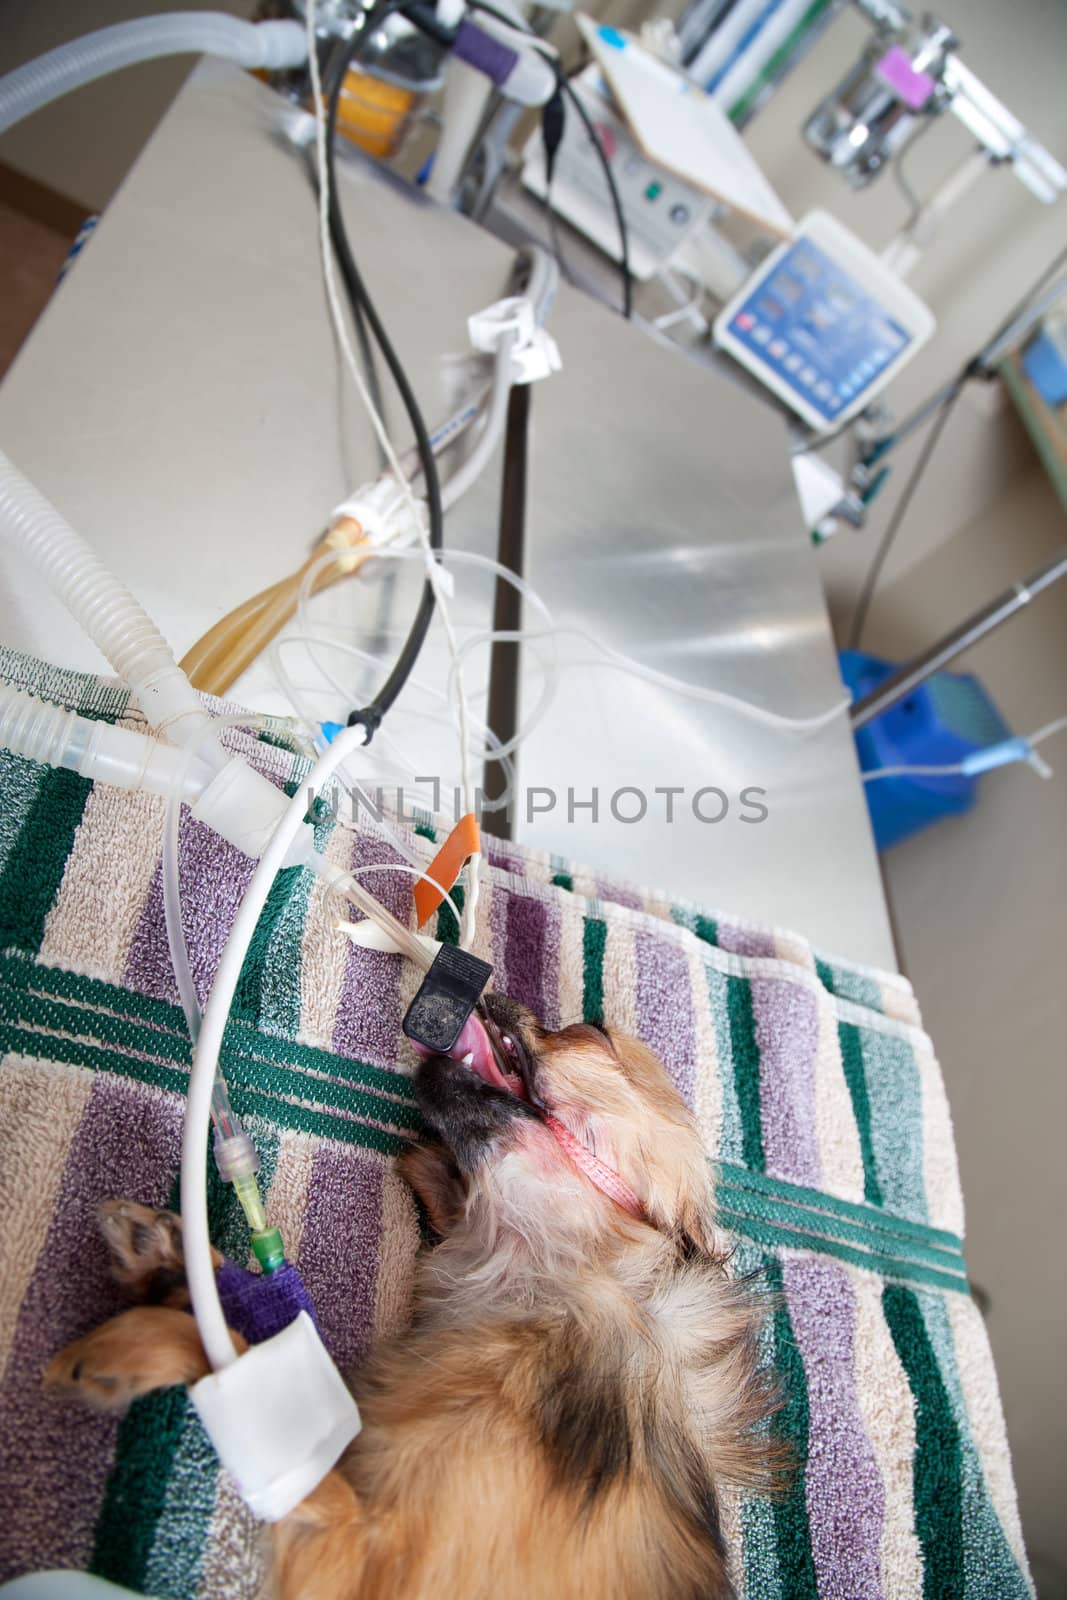 Small dog under anesthesia by Creatista